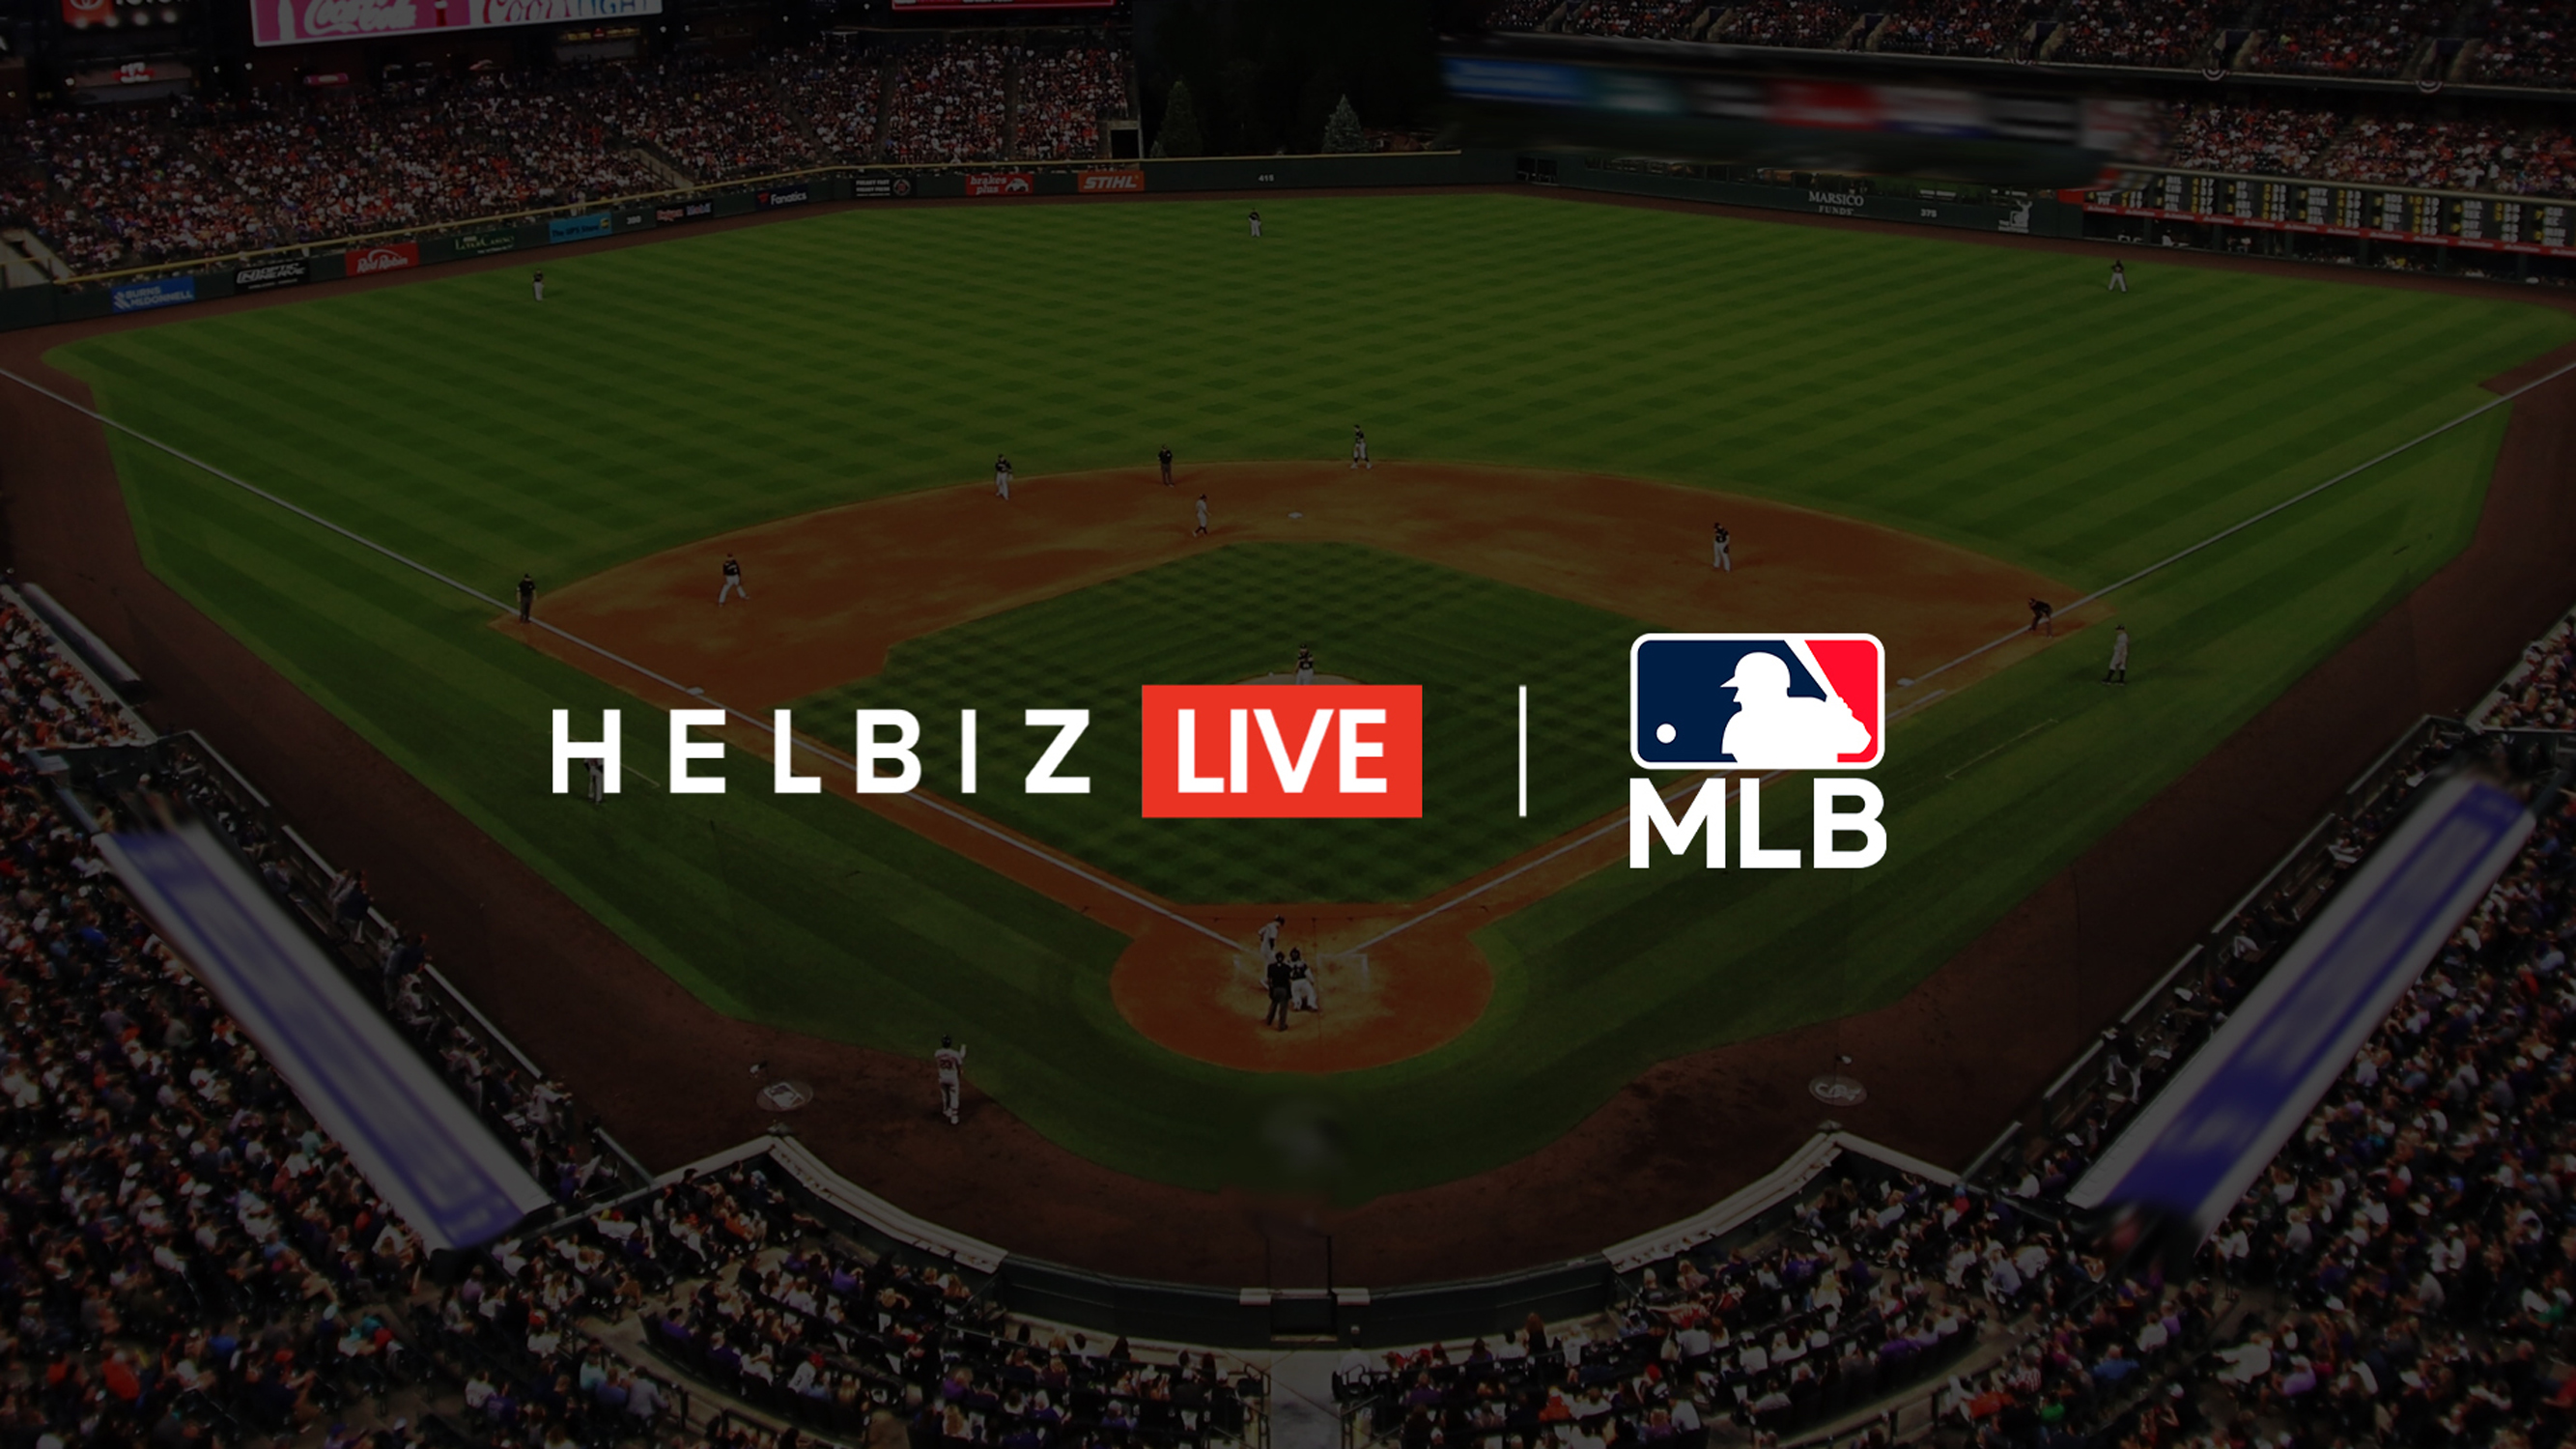 Helbiz Media Signs Agreement With MLB to Stream Next Three